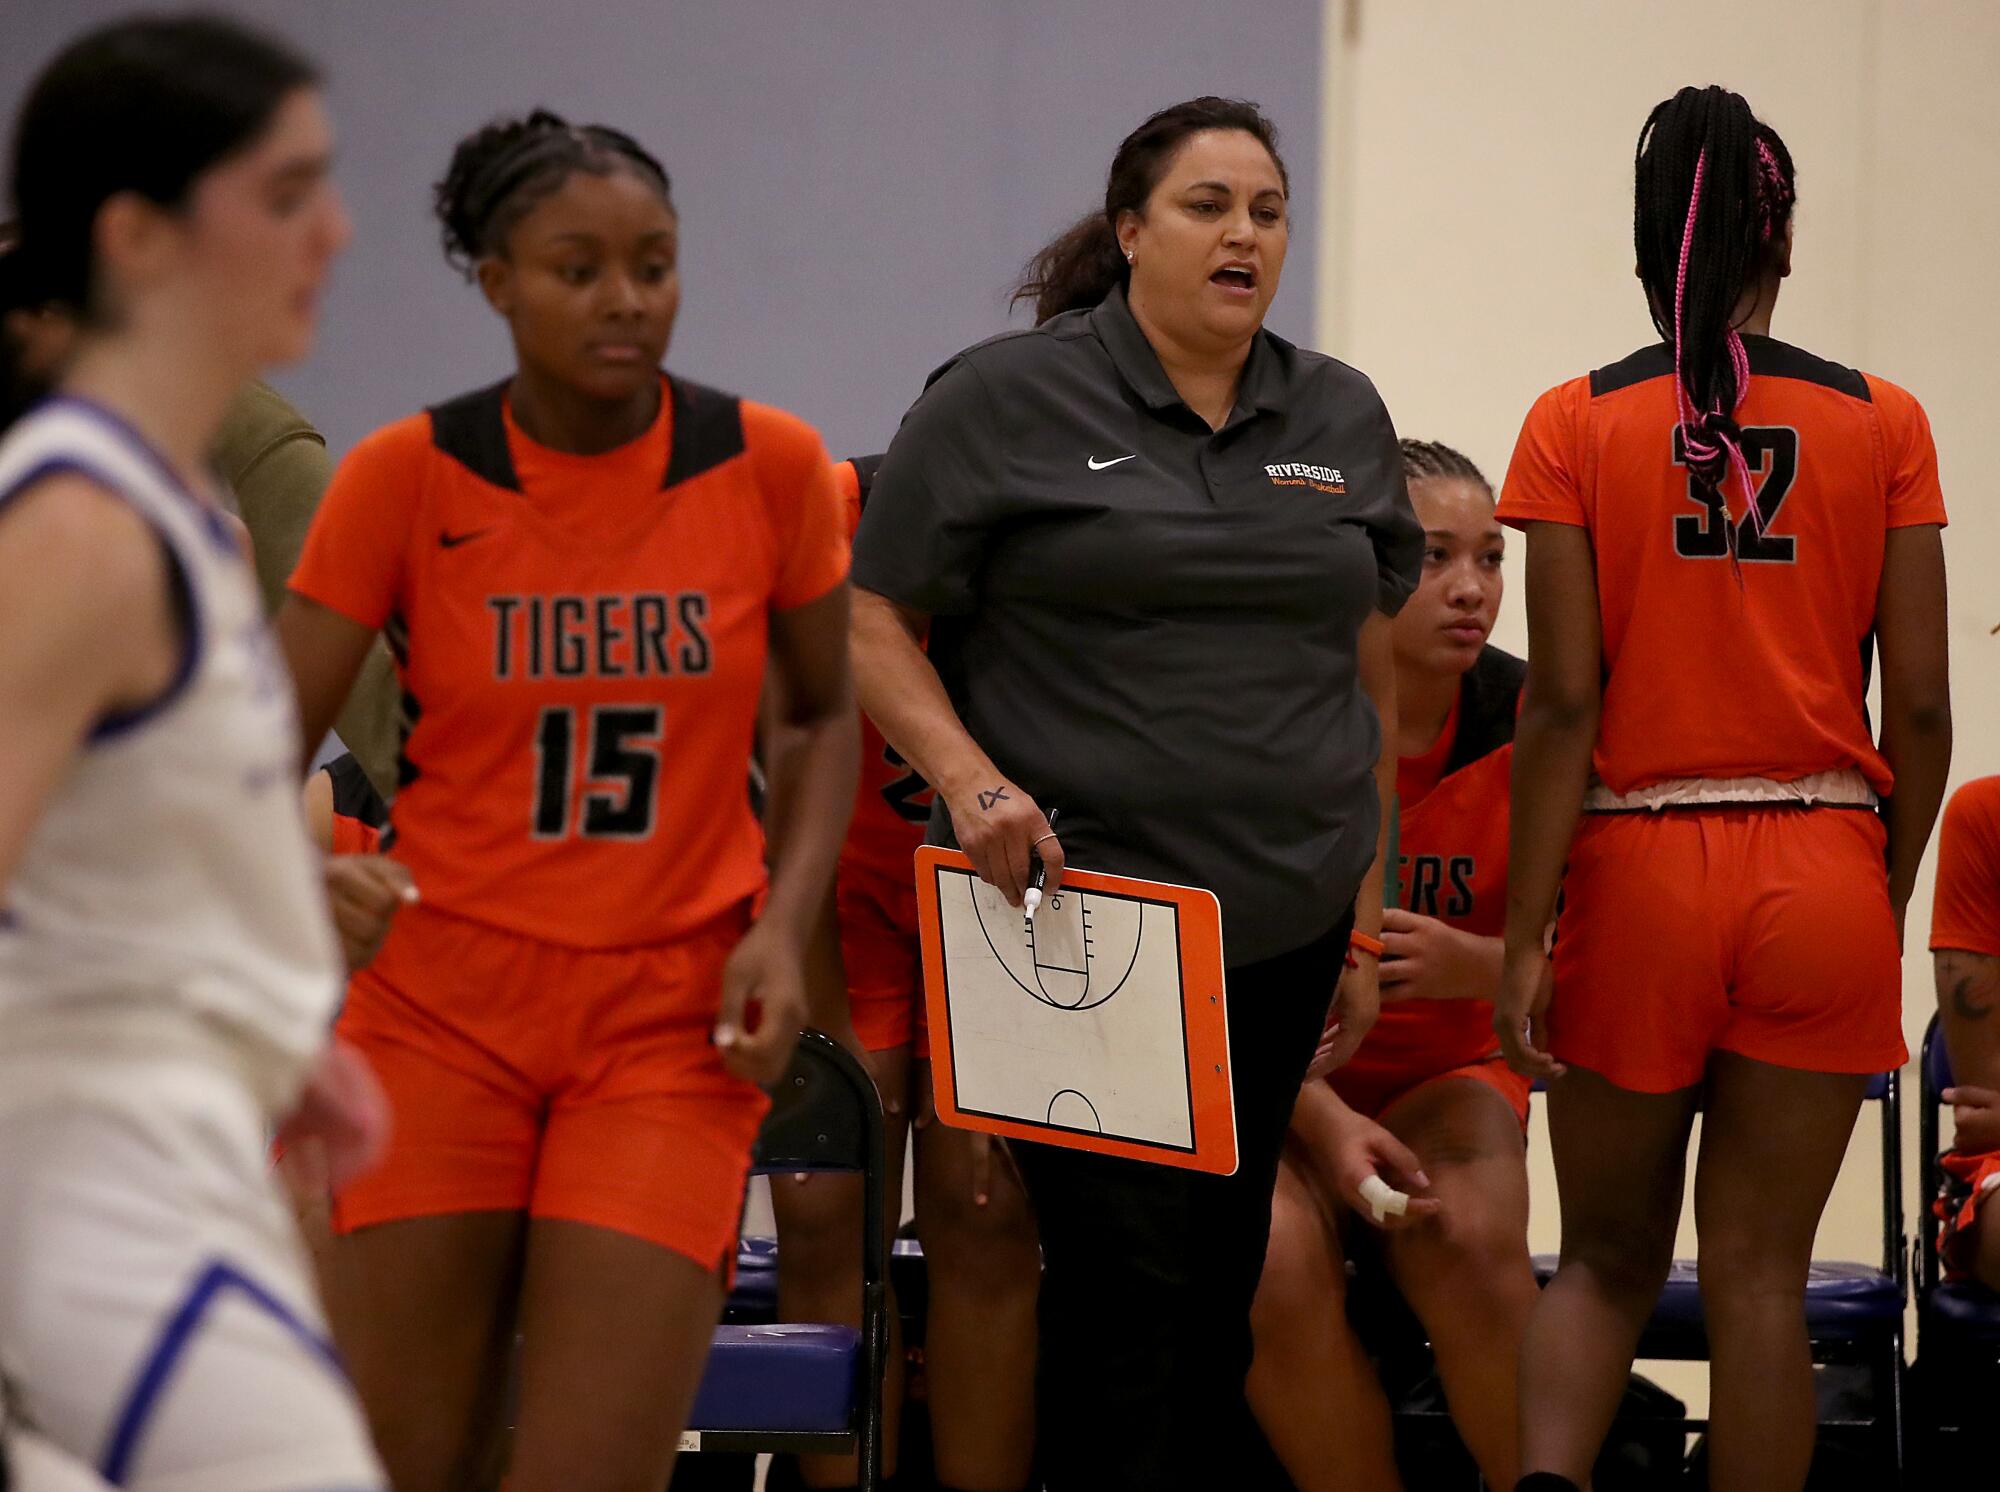 Riverside City College women's basketball coach Alicia Berber stands on the sideline during a game.